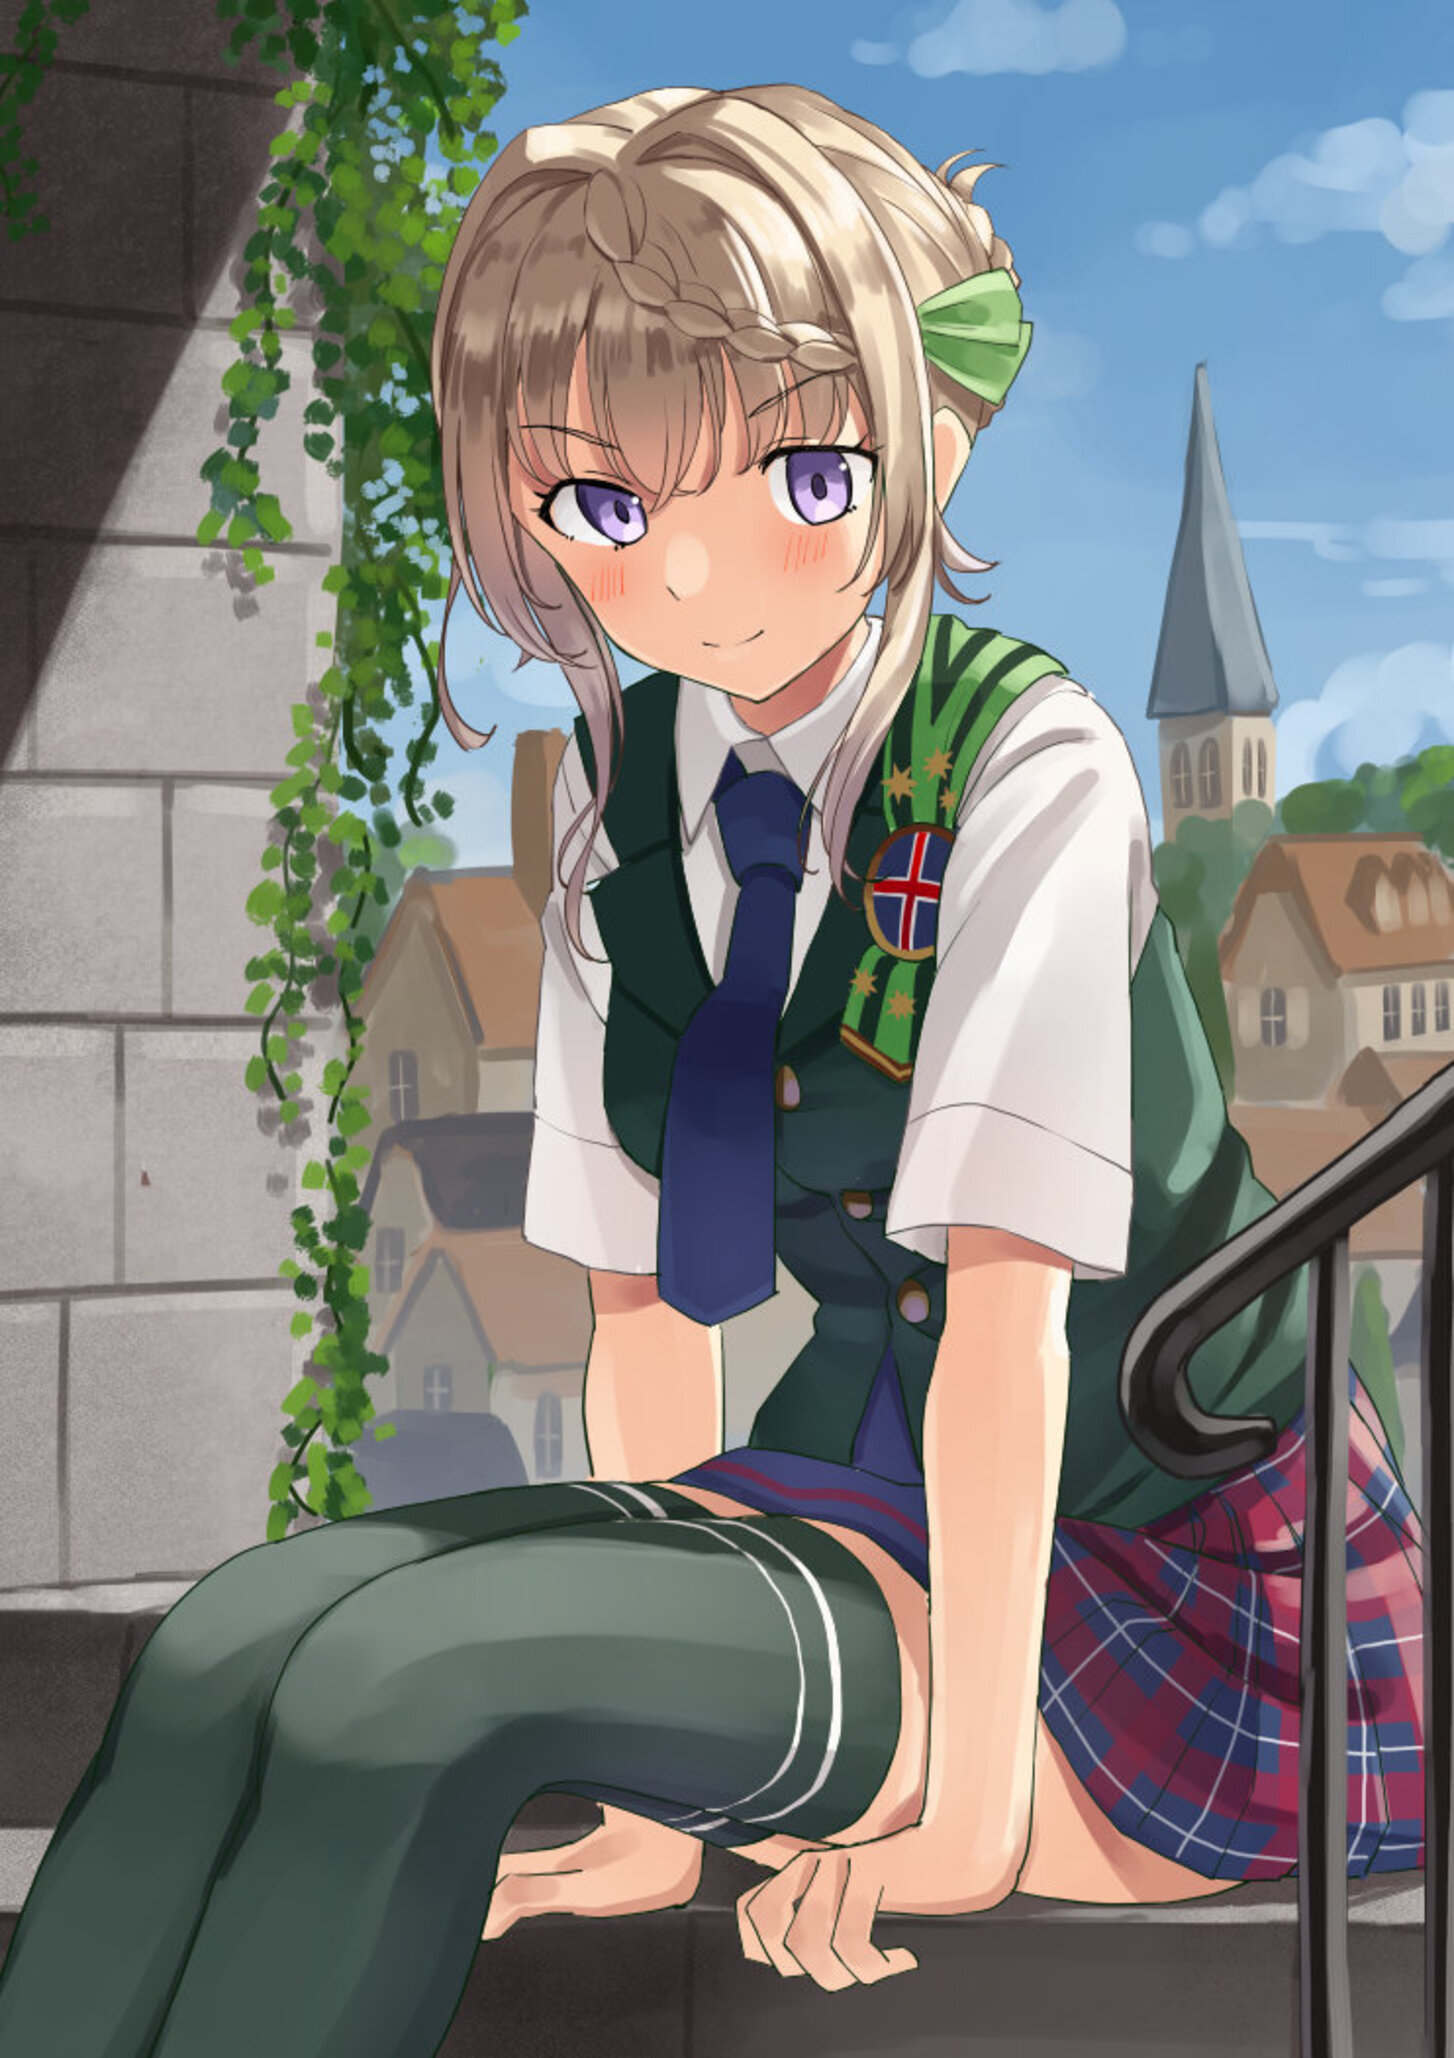 Anime 1454x2058 anime anime girls Kantai Collection Perth (KanColle) long hair blonde solo artwork digital art fan art stockings sitting women outdoors green stockings tie plaid skirt skirt purple eyes green clothing looking at viewer thighs together